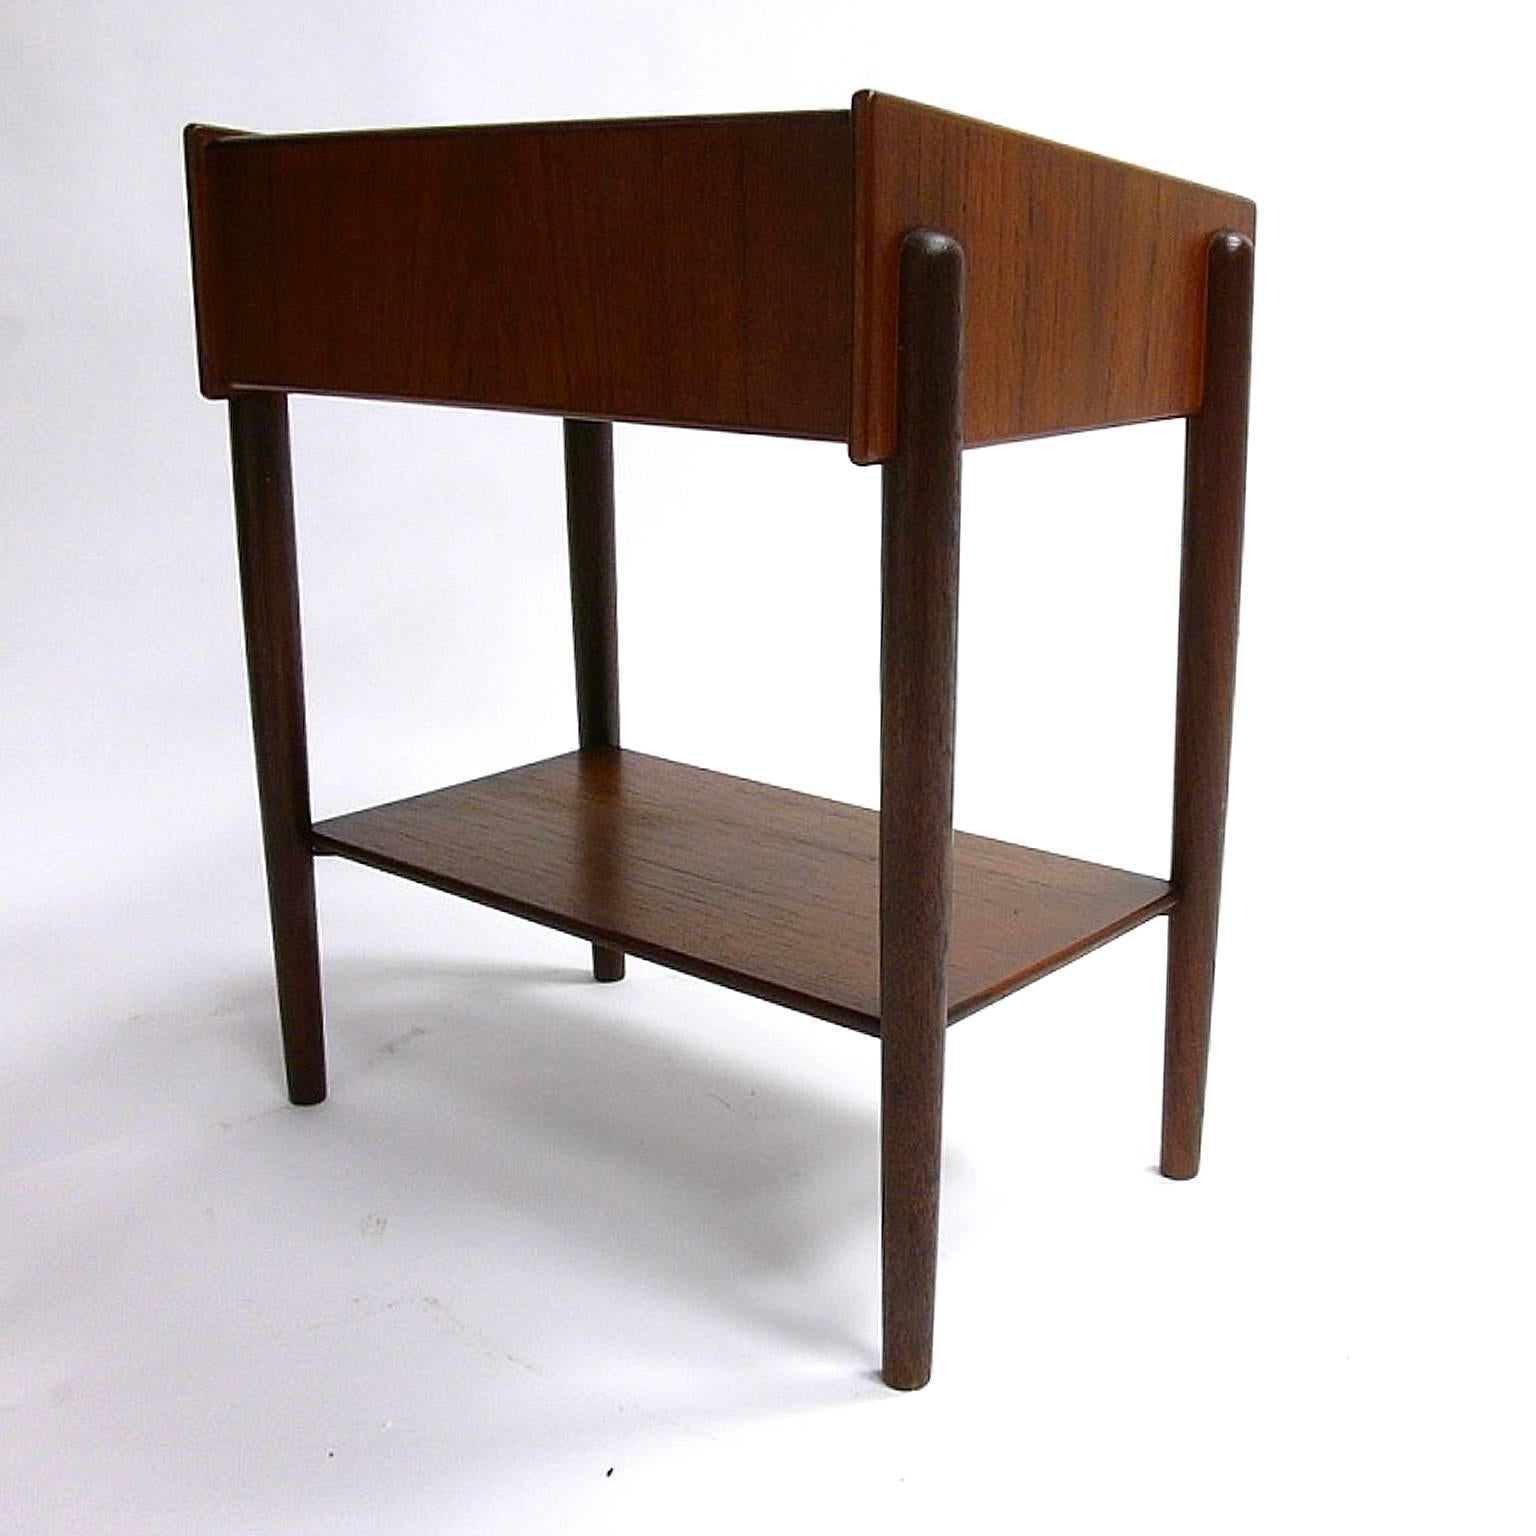 Mid-20th Century Pair of Borge Mogensen Teak Nightstands or Bedside Tables with Single Drawer